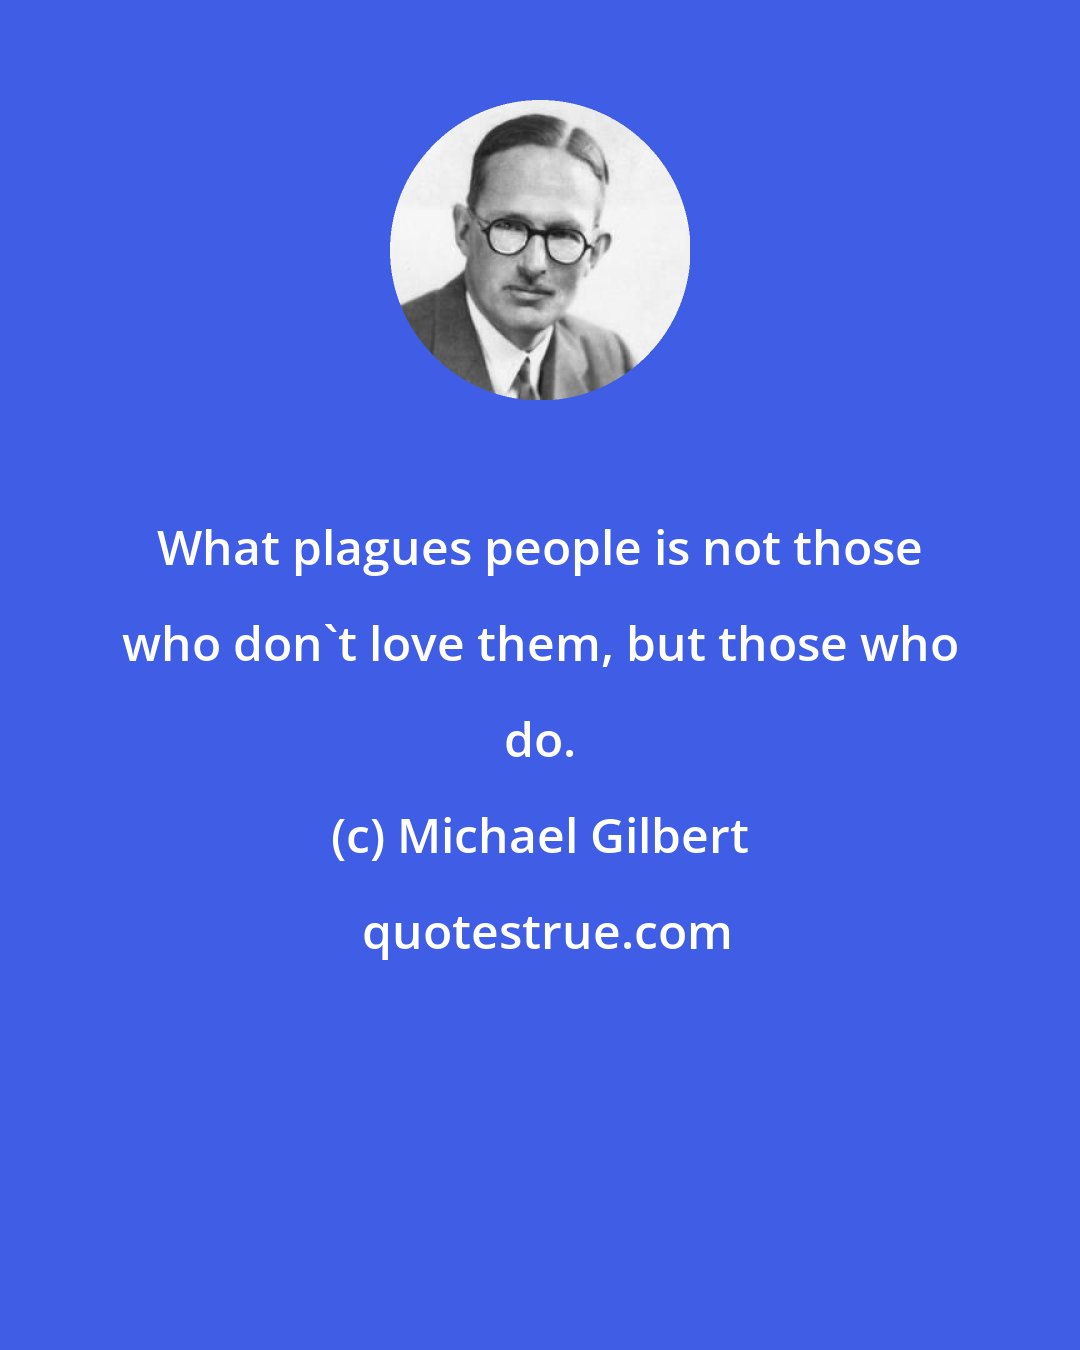 Michael Gilbert: What plagues people is not those who don't love them, but those who do.